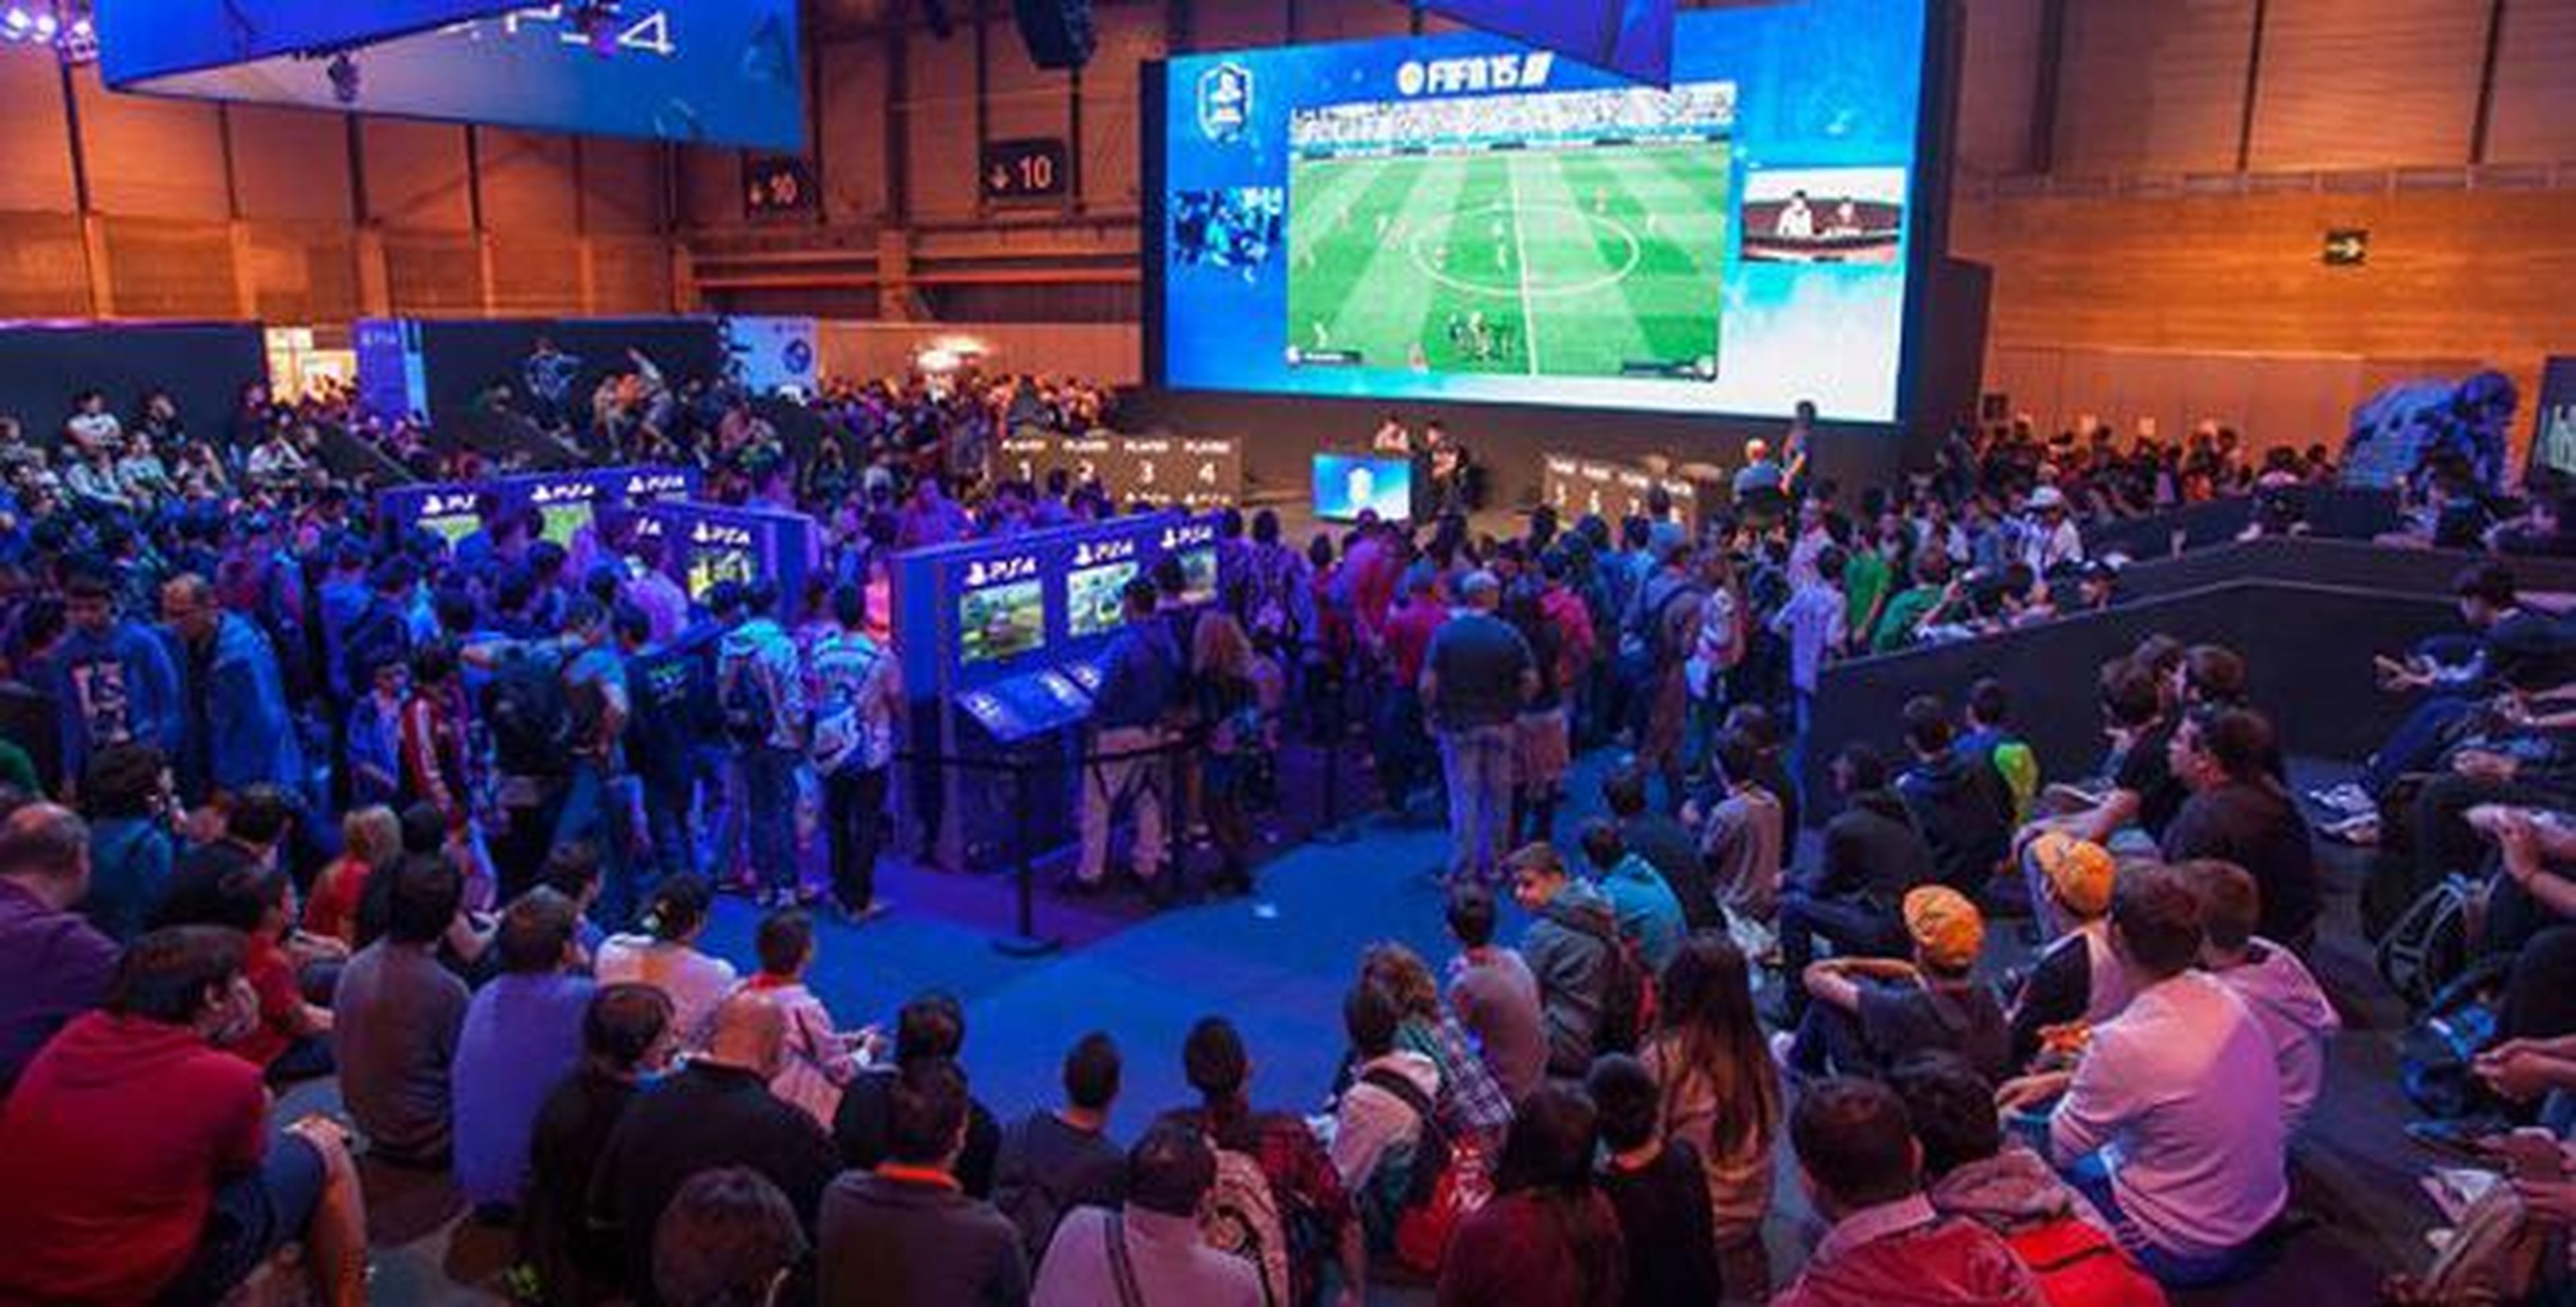 Barcelona Games World vs Madrid Gaming Experience ¡Fight!